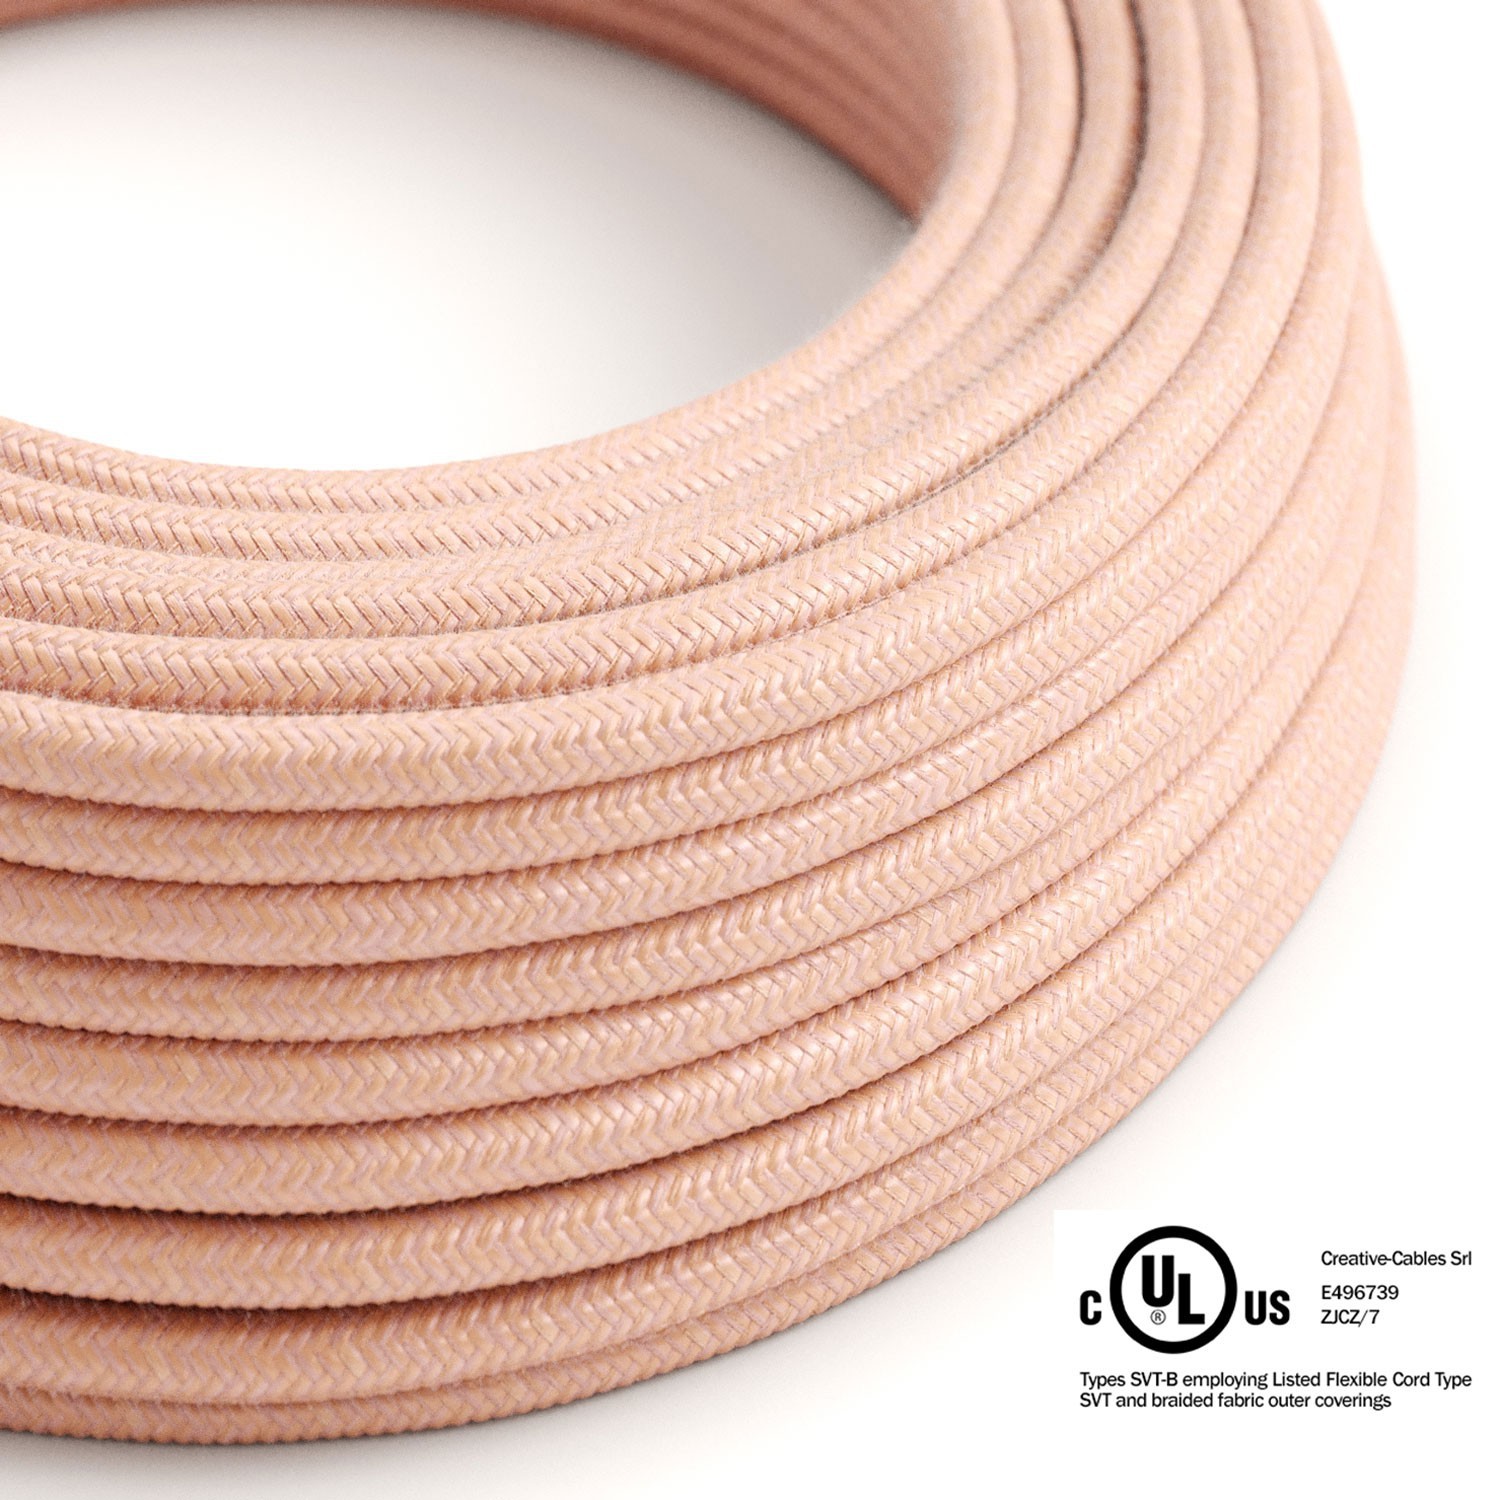 Round Electric Cable 150 ft (45,72 m) coil RX13 Salmon Cotton - UL listed